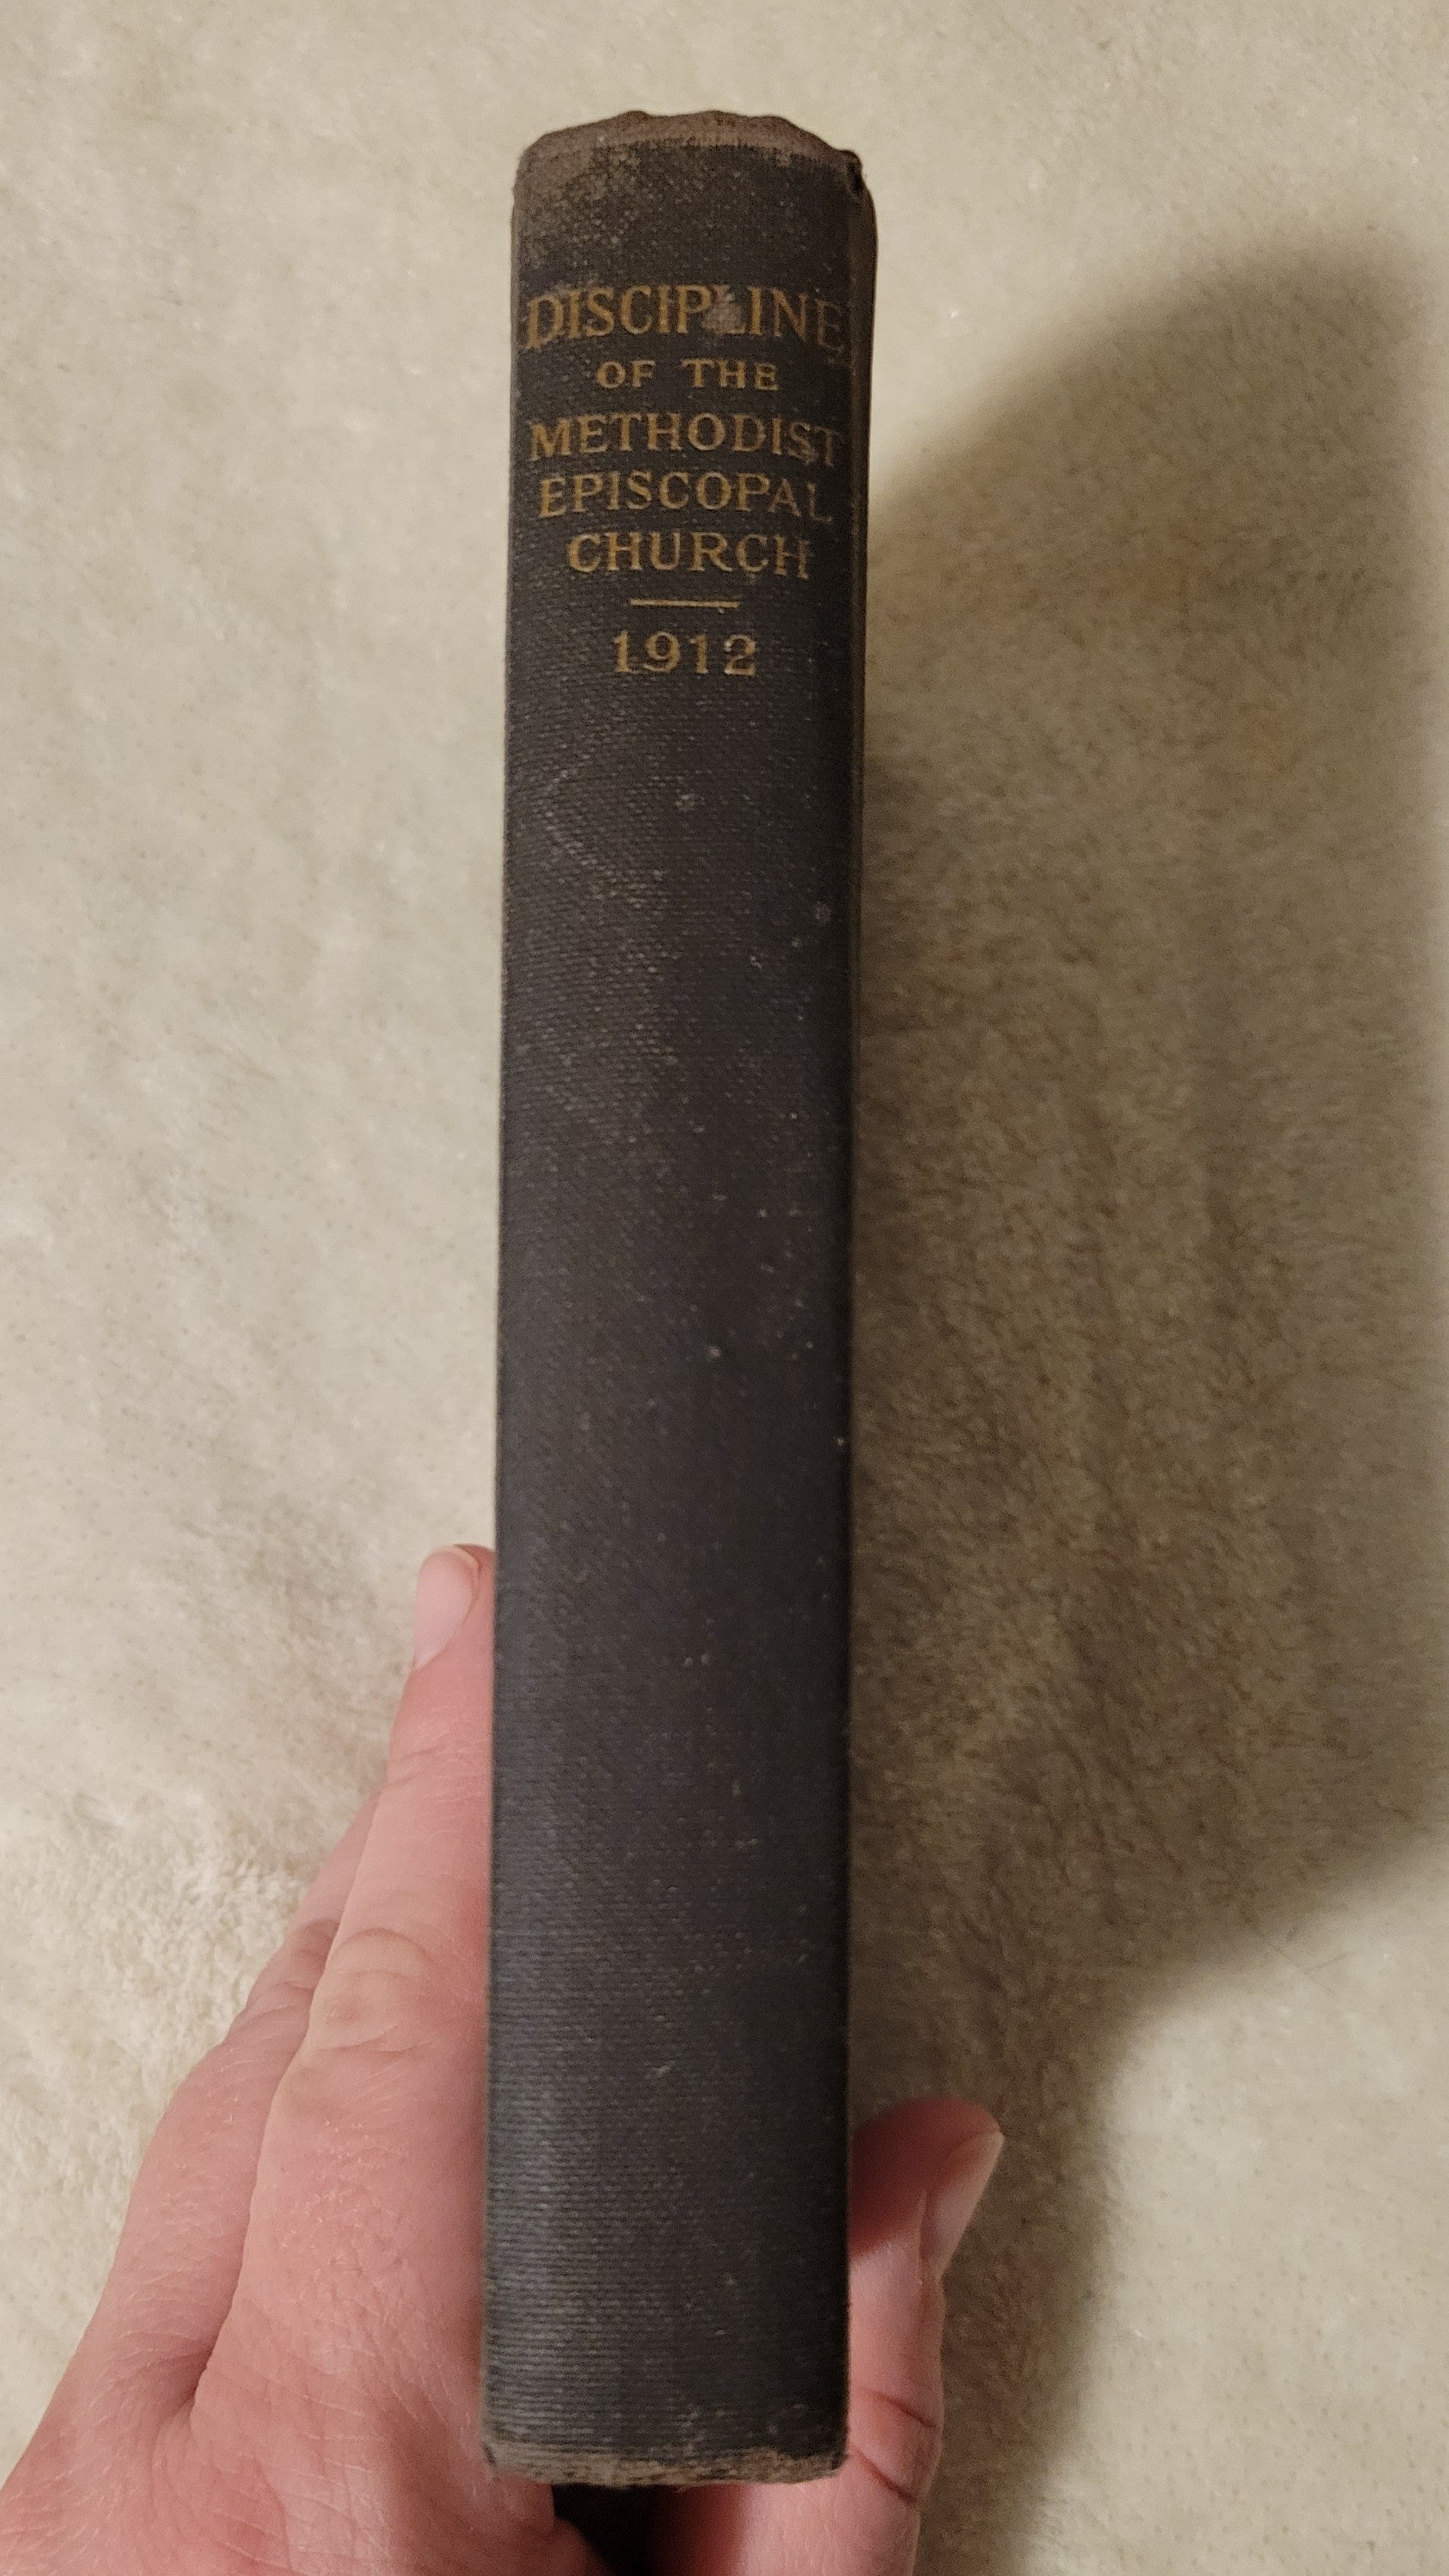 Antique book "Doctrines and Discipline of the Methodist Episcopal Church" published by the Methodist Book Concern, 1912. View of spine.